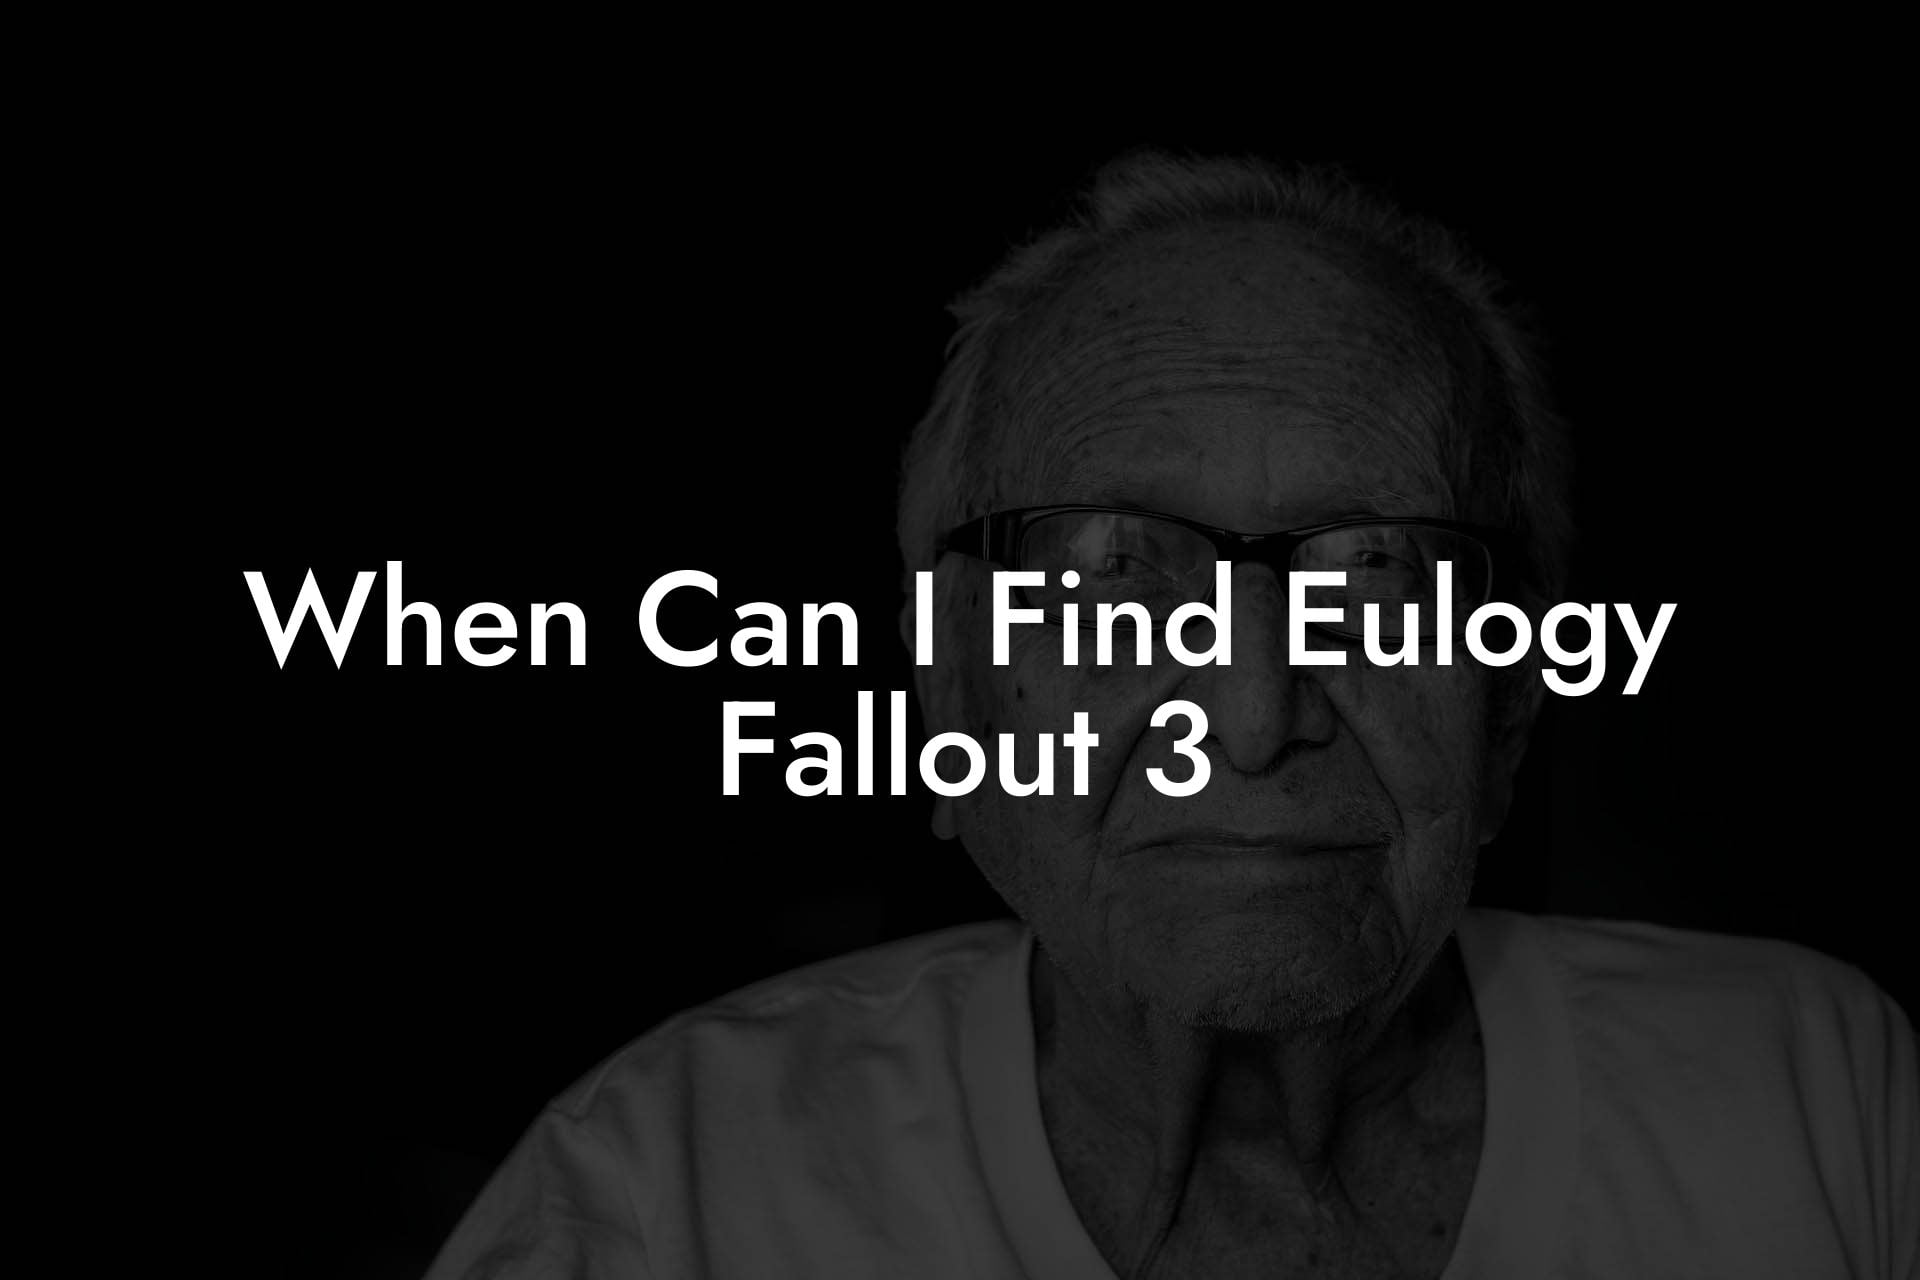 When Can I Find Eulogy Fallout 3